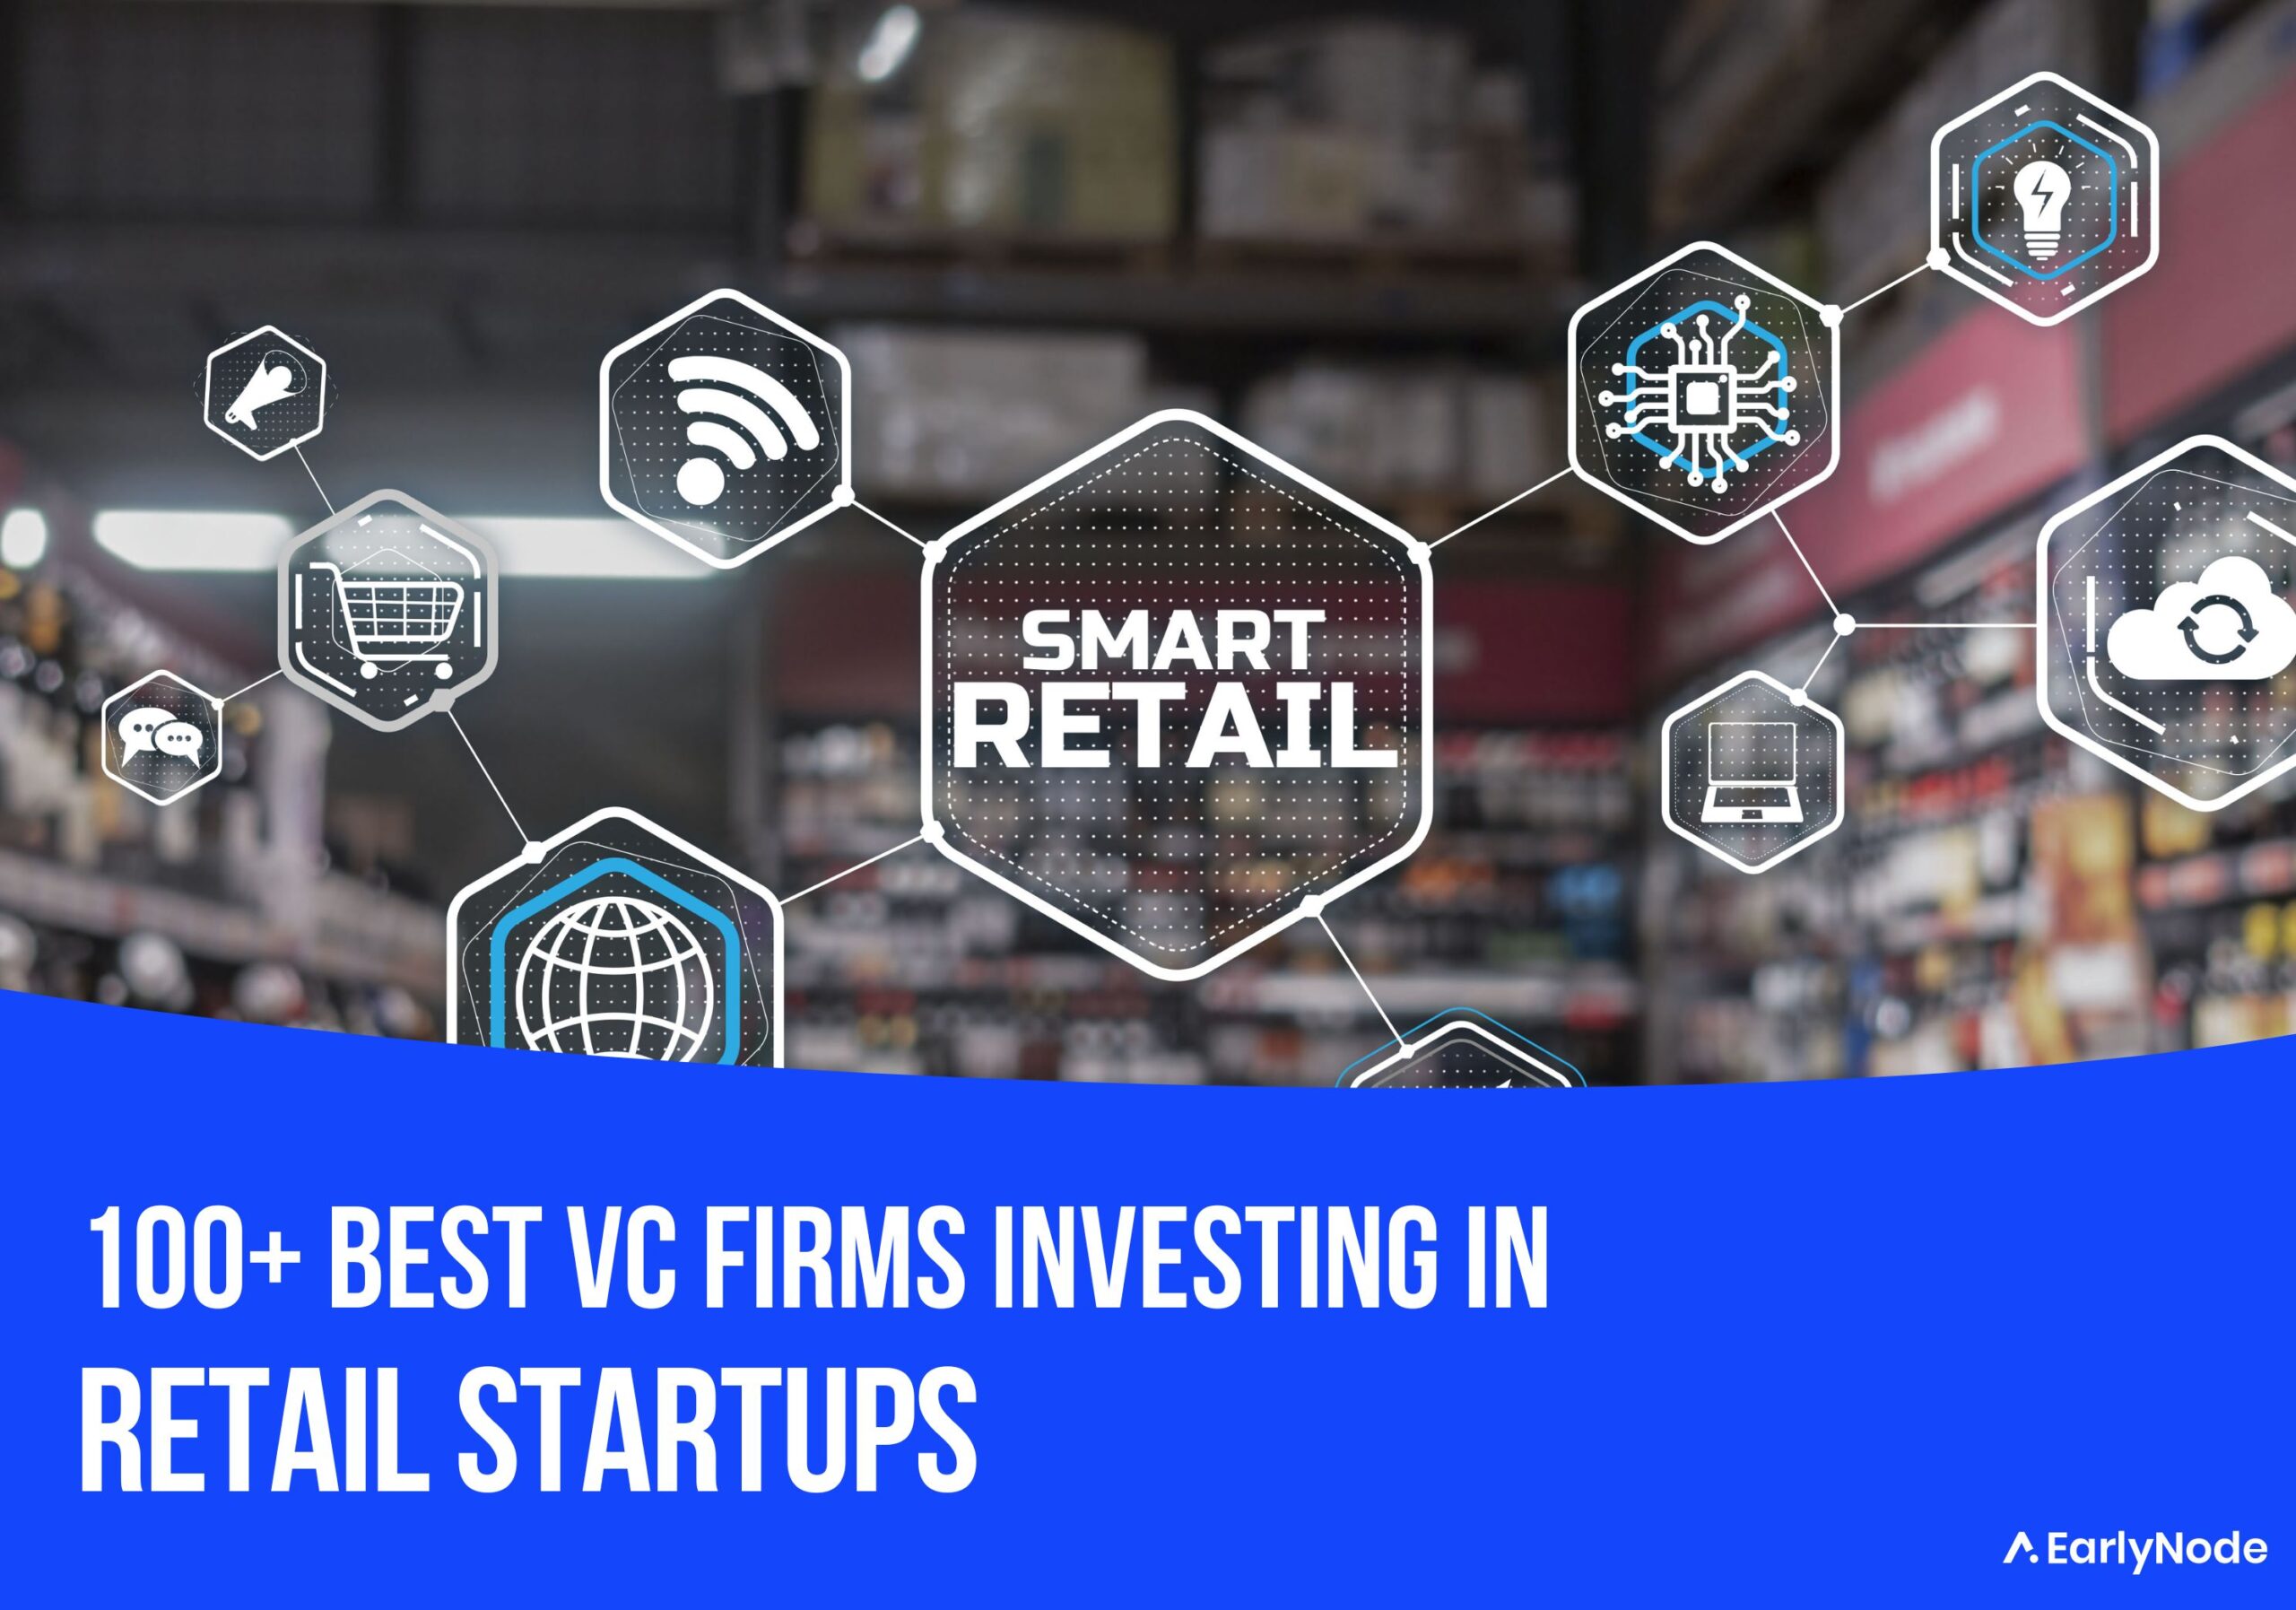 100+ Best Venture Capital (VC) Firms That Invest in Retail Startups